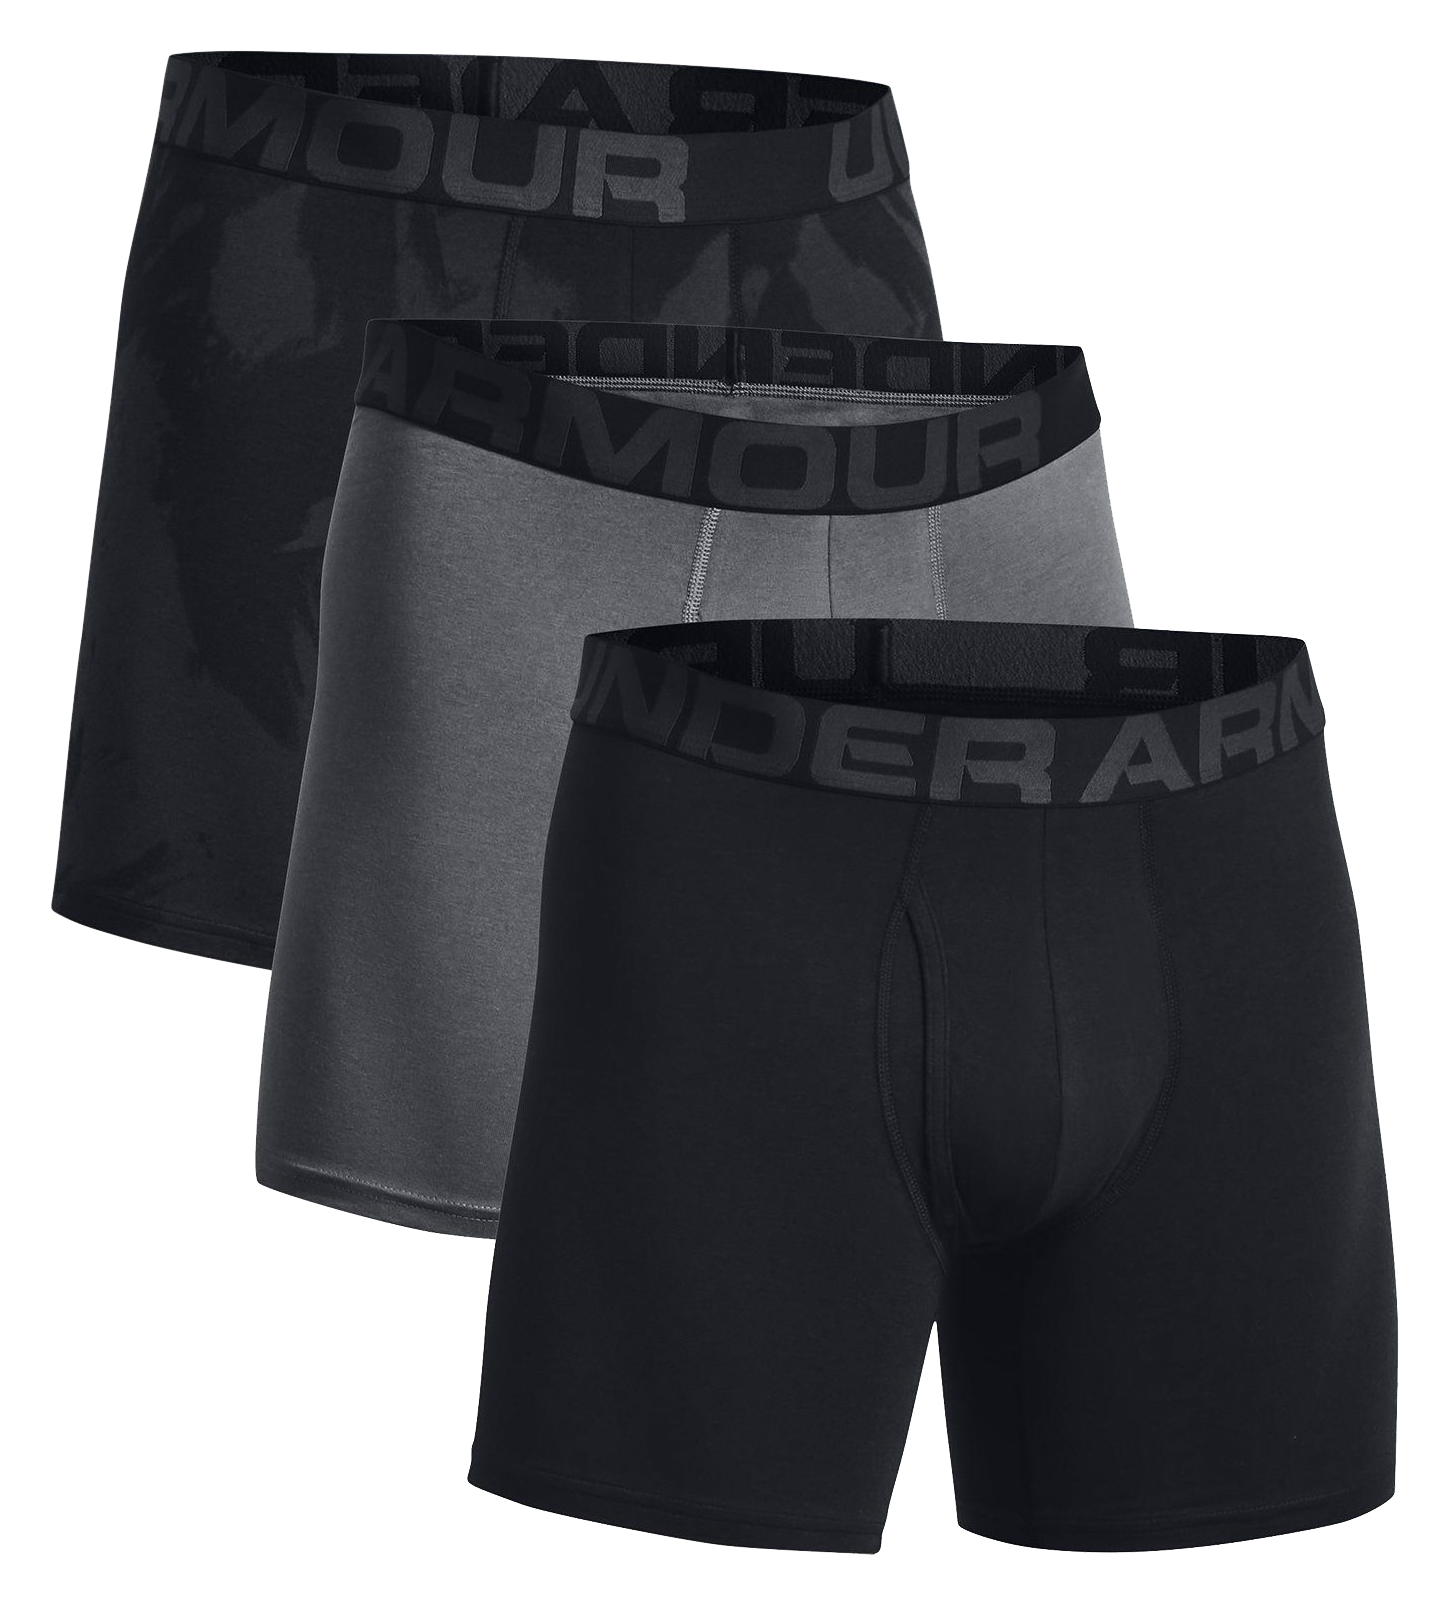 Under Armour Charged Cotton 6"" Patterned Boxerjock for Men - Black/Pitch Gray/Jet Gray - 5XL